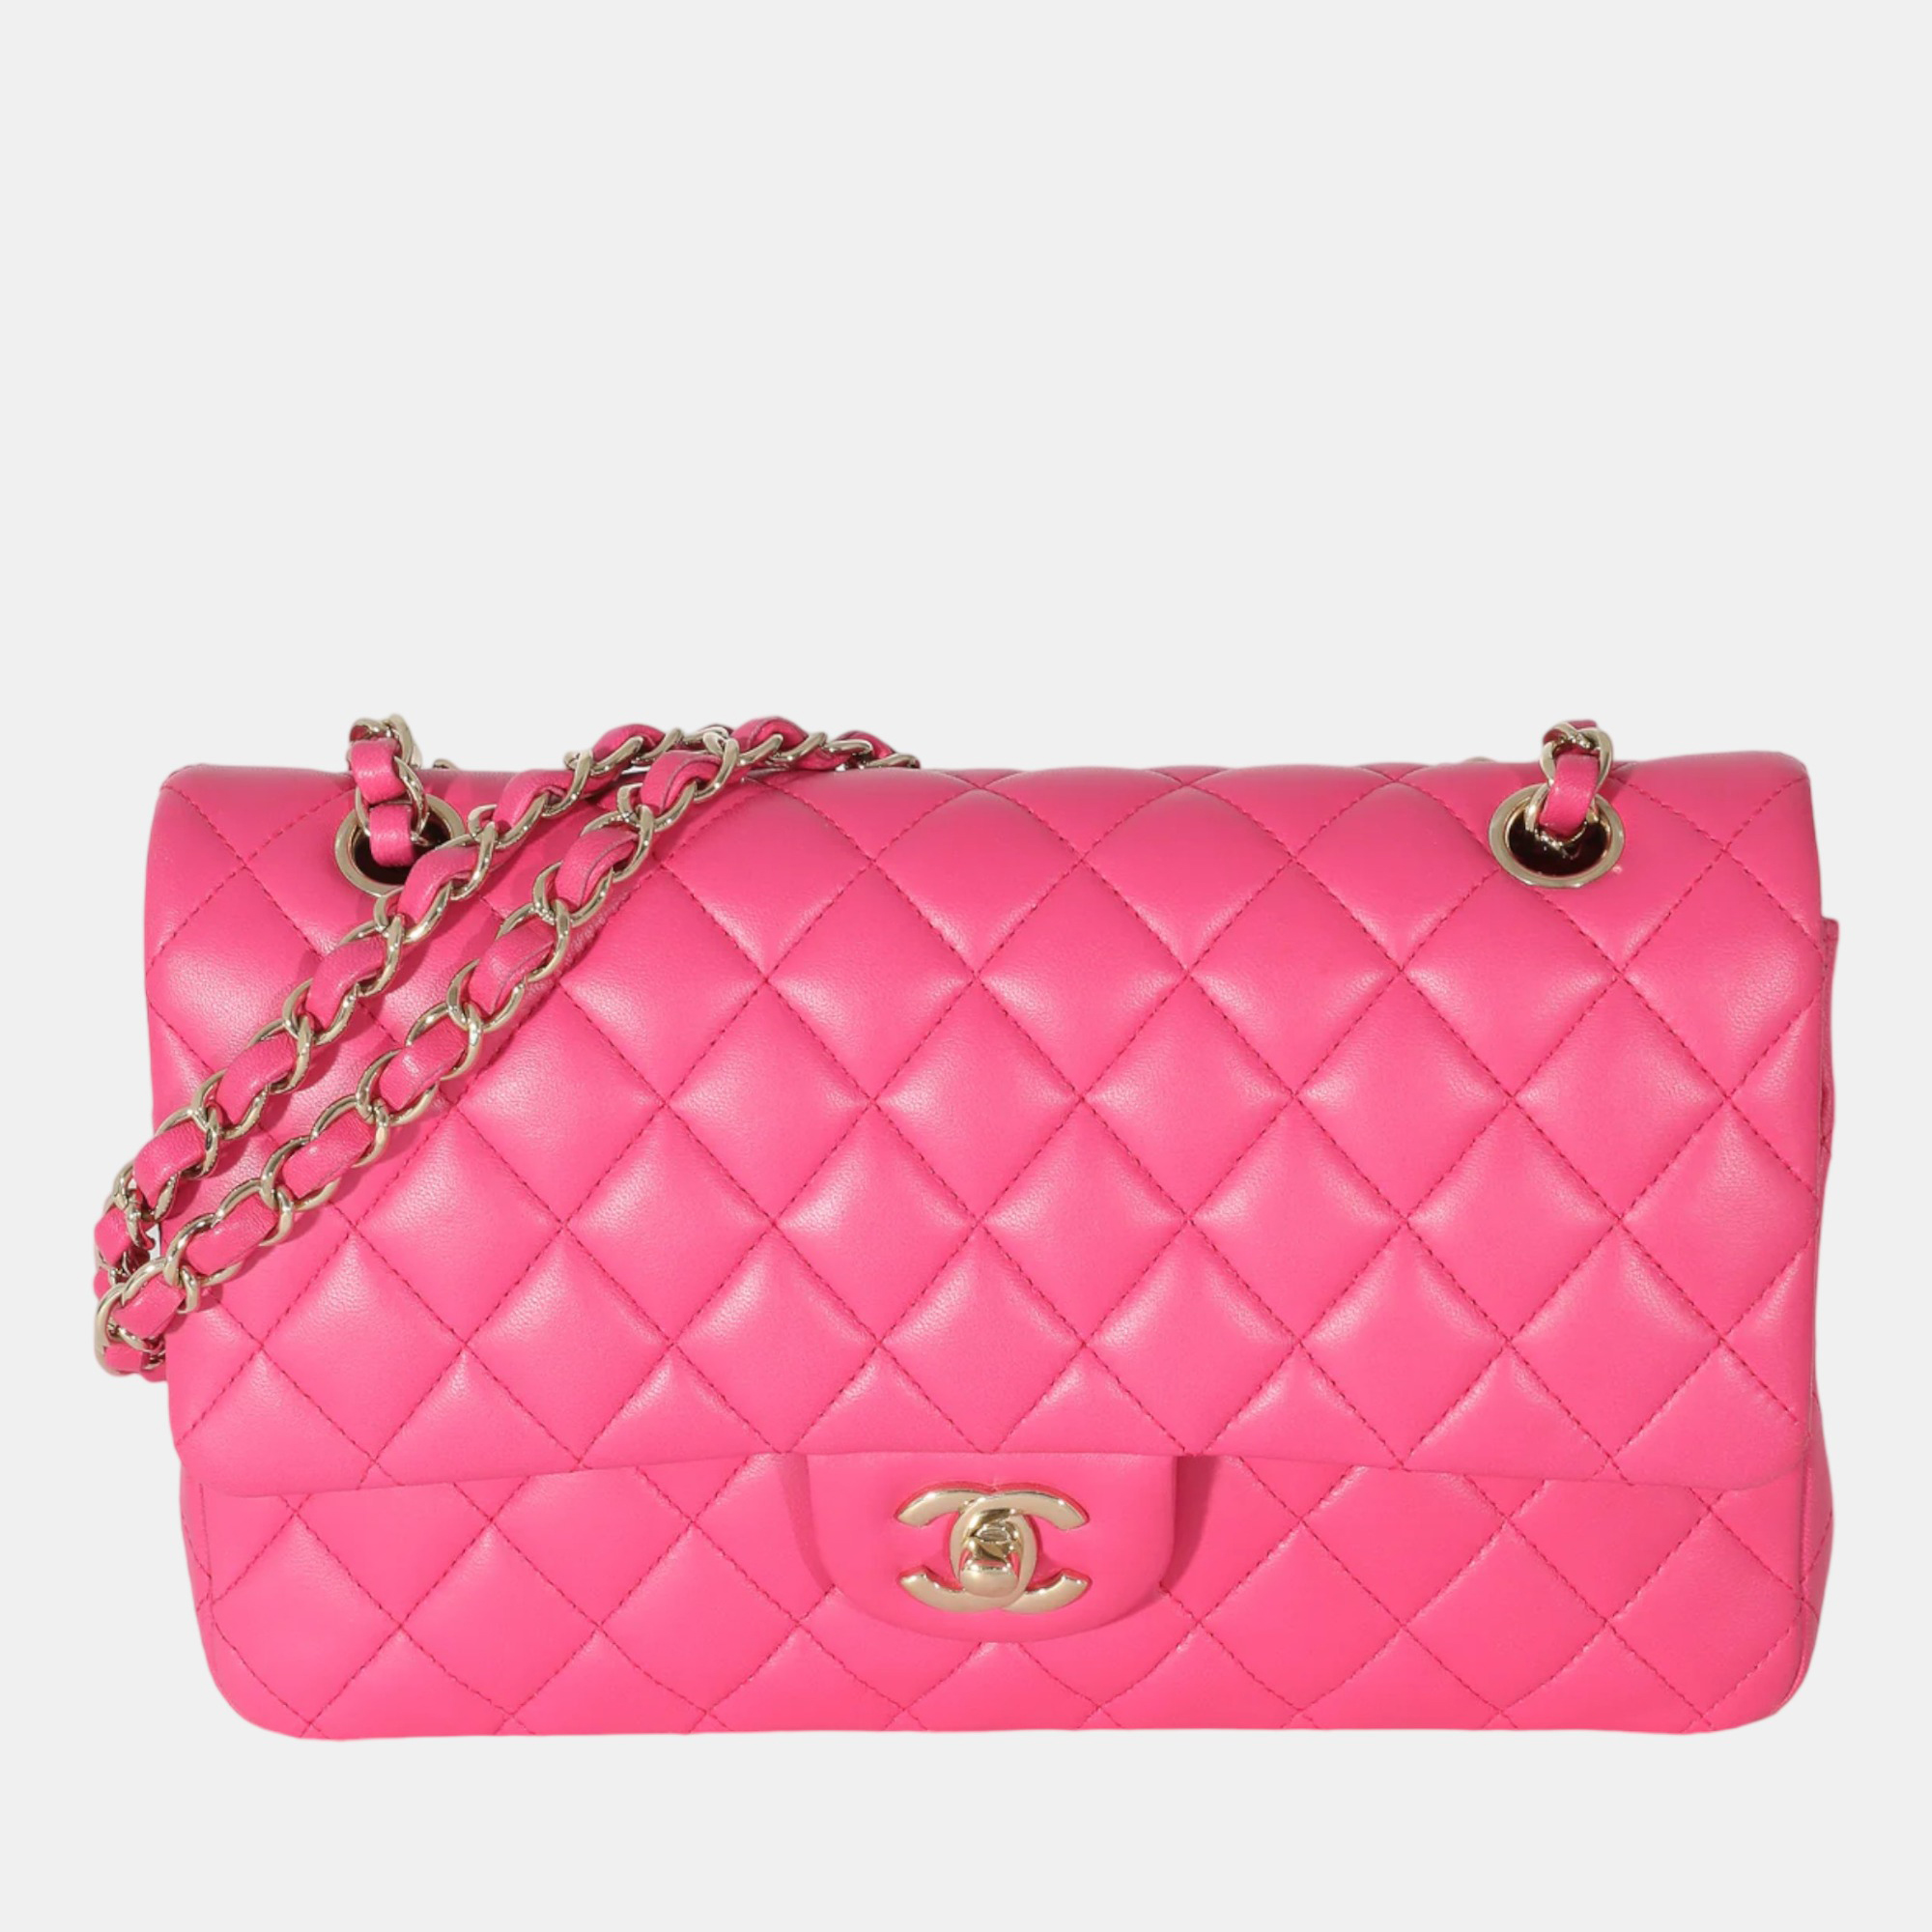 Chanel Pink Quilted Lambskin Leather Medium Classic Double Flap Shoulder Bag